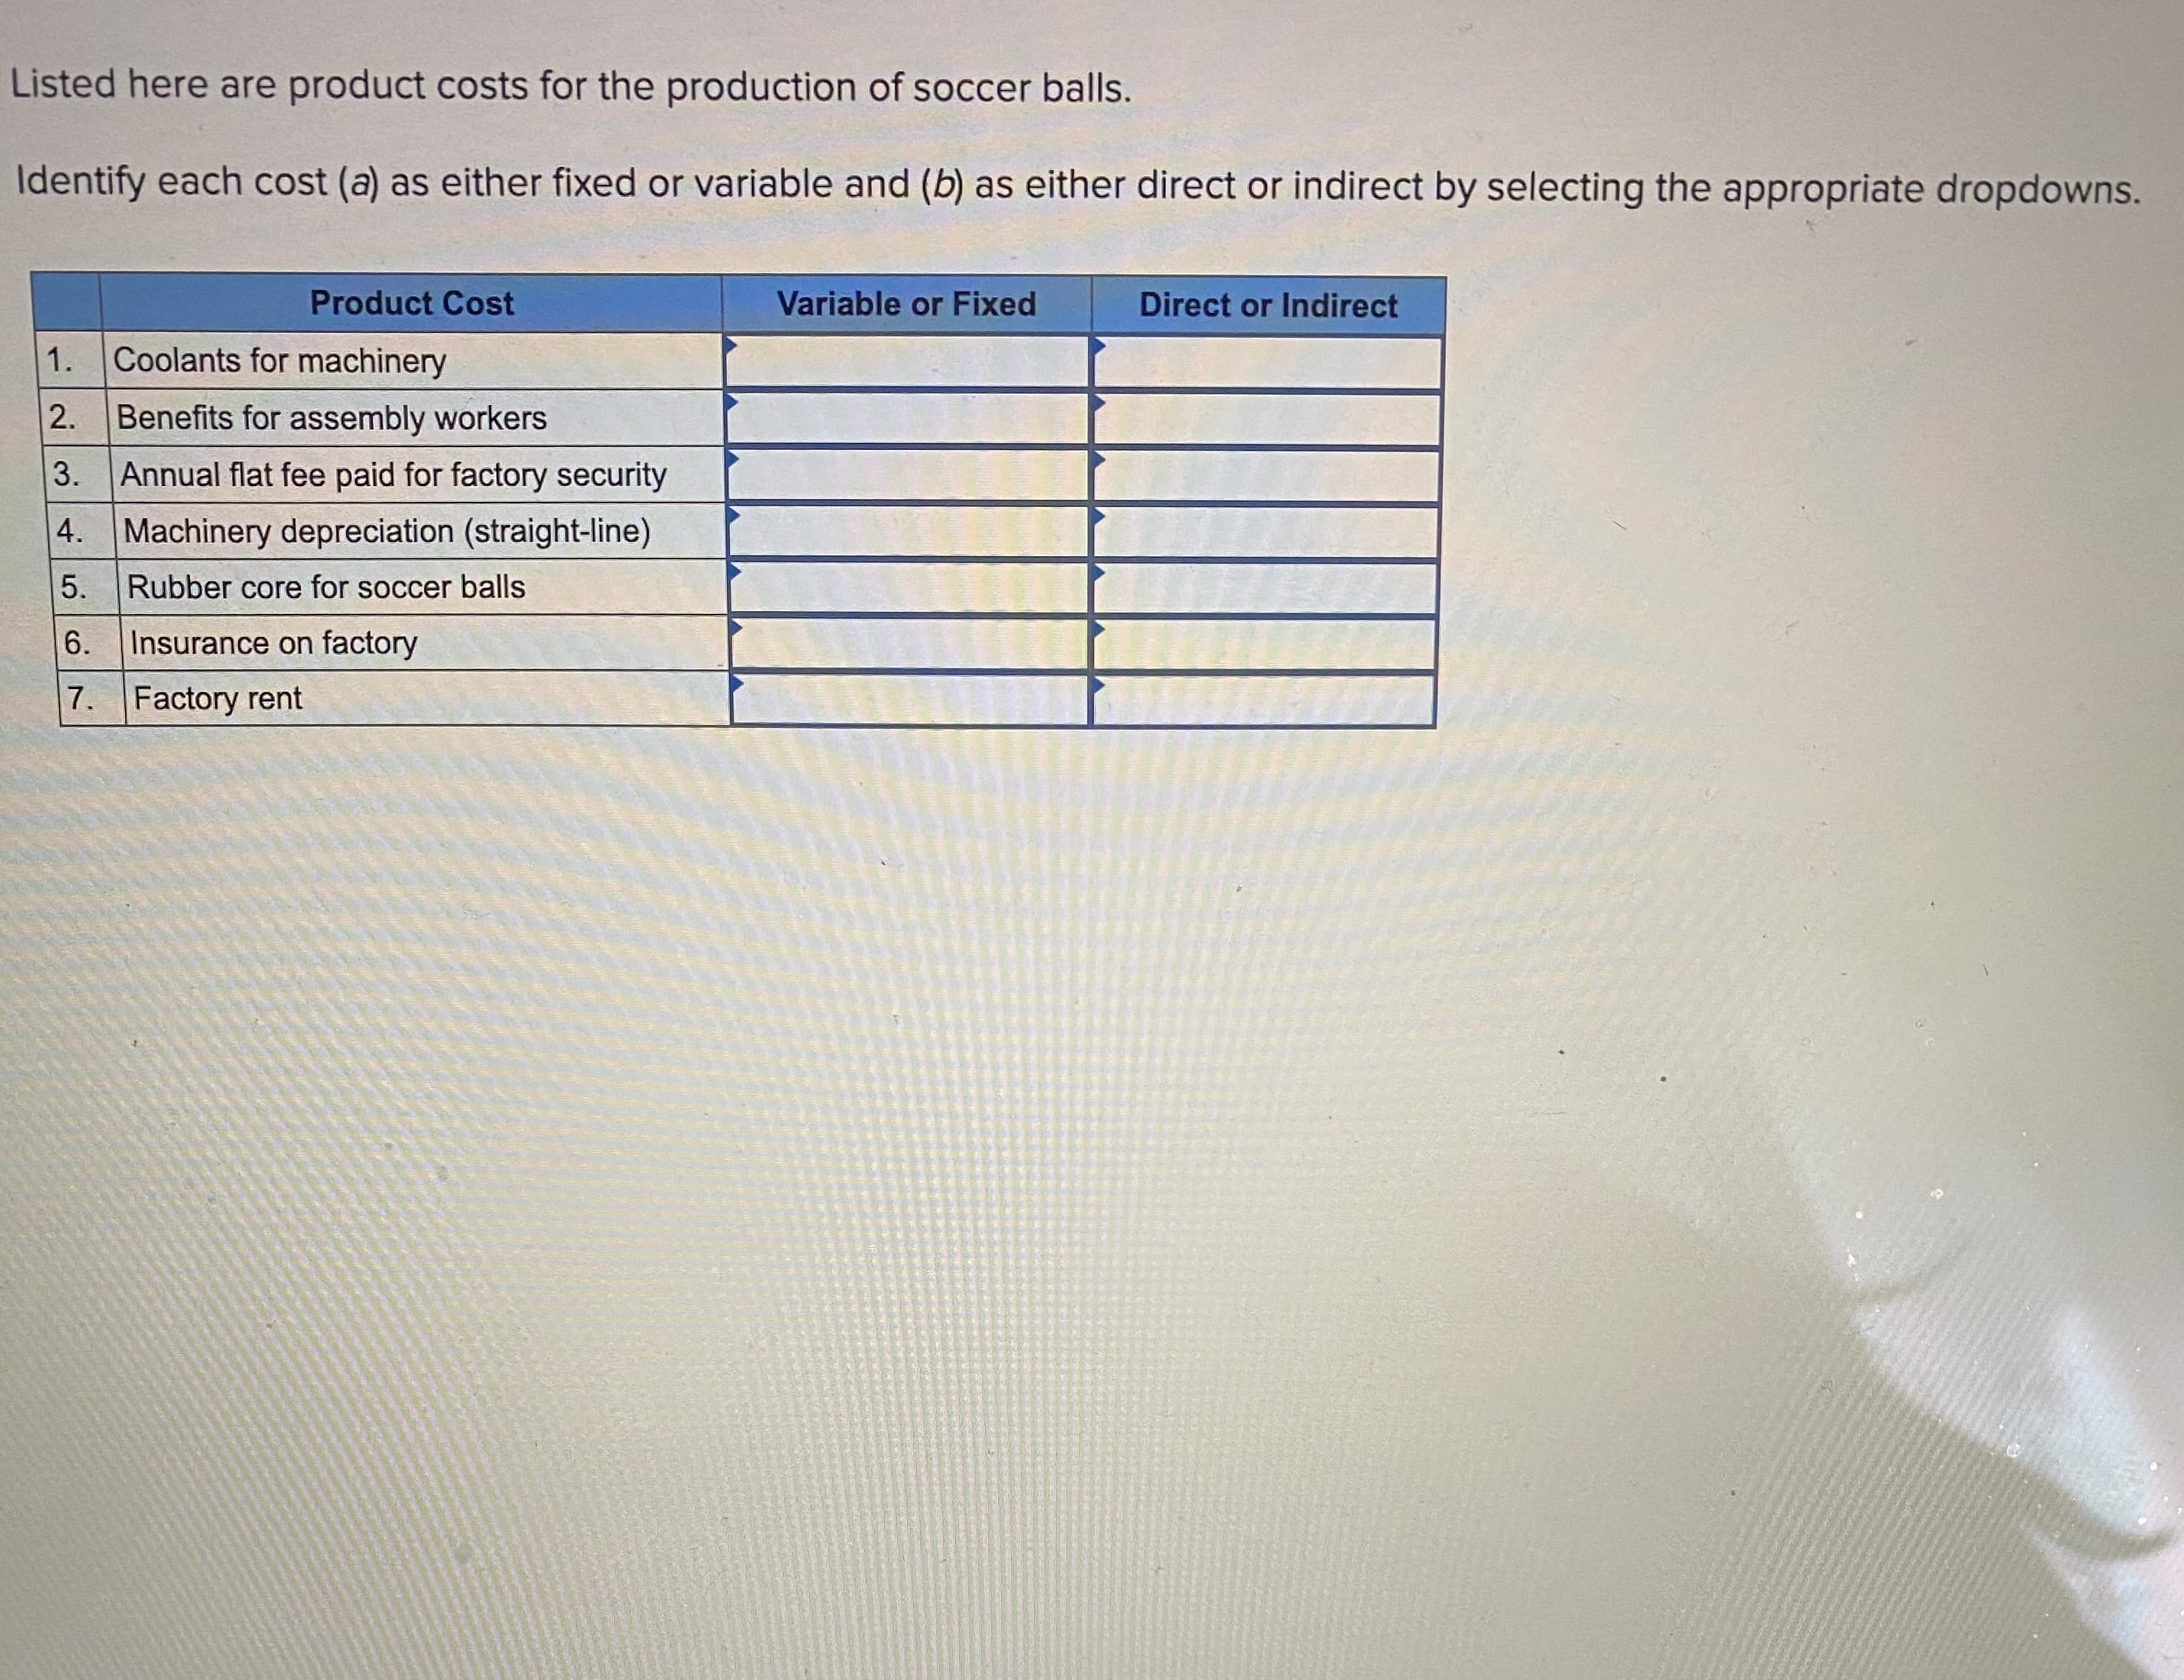 Listed here are product costs for the production of soccer balls.
Identify each cost (a) as either fixed or variable and (b) as either direct or indirect by selecting the appropriate dropdowns.
Product Cost
Variable or Fixed
Direct or Indirect
1.
Coolants for machinery
2.
Benefits for assembly workers
3. Annual flat fee paid for factory security
4. Machinery depreciation (straight-line)
5.
Rubber core for soccer balls
6.
Insurance on factory
7. Factory rent
